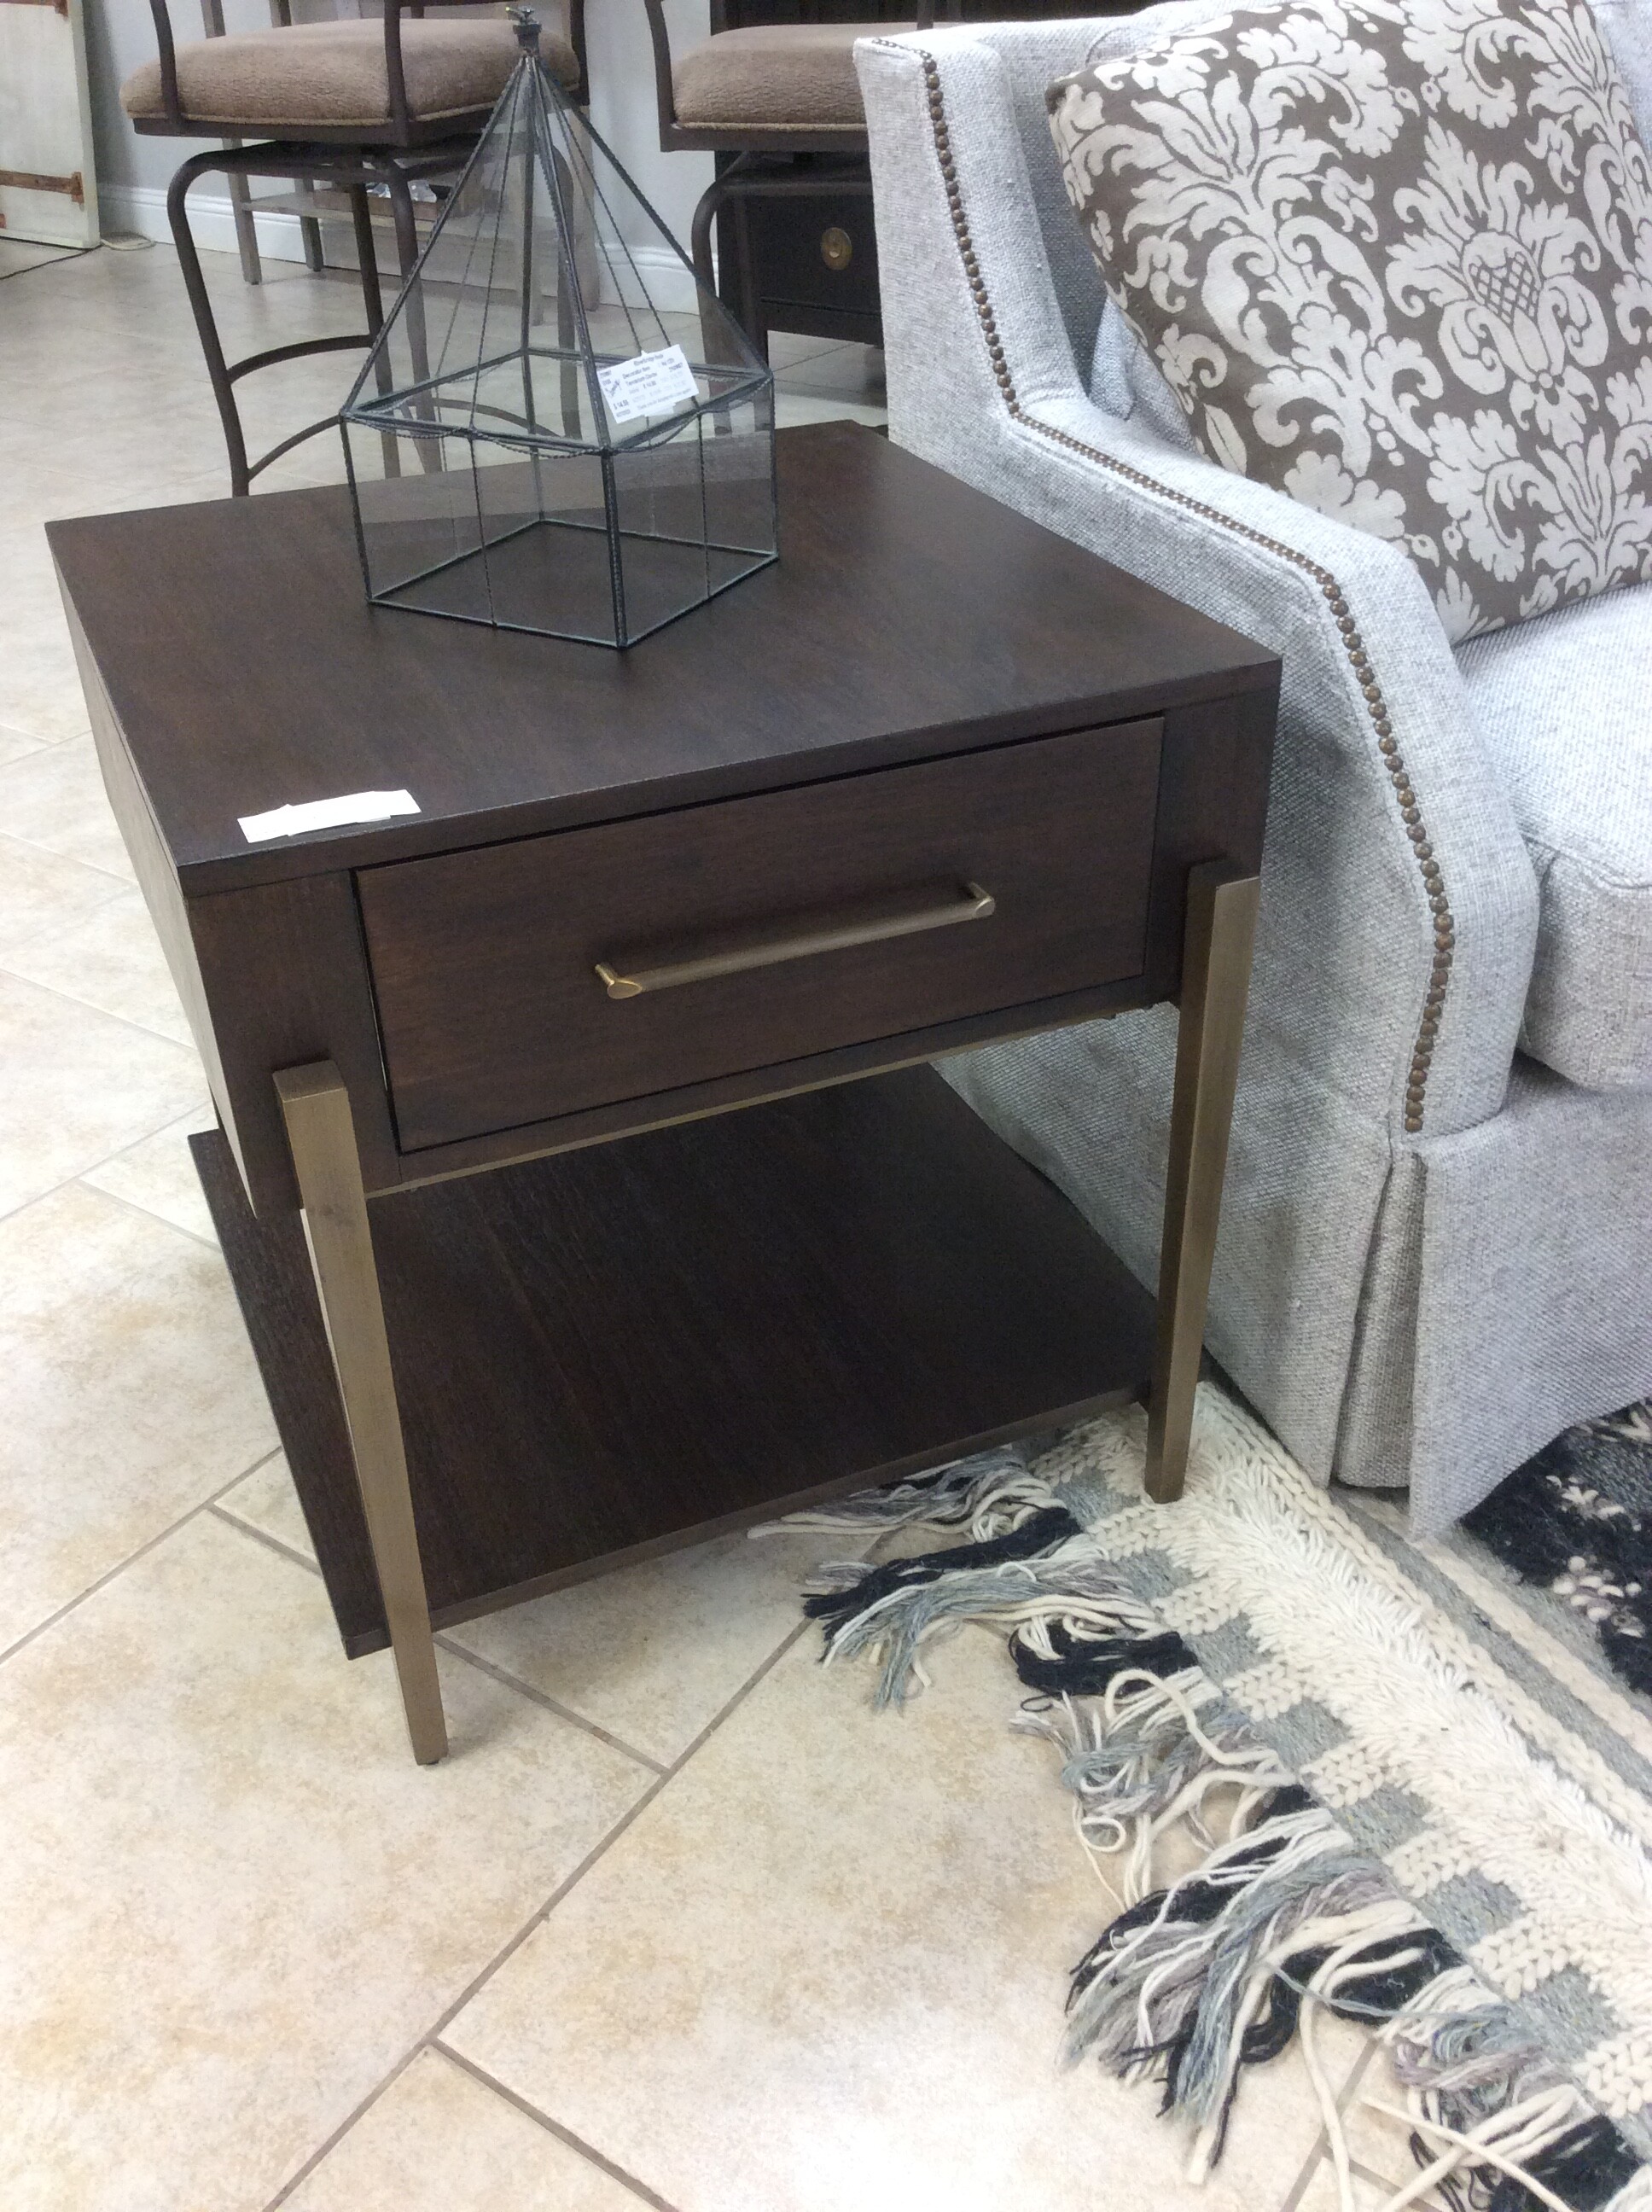 This is a lovely end table by Riverside Furniture. Modern in design,  it includes a drawer with dovetail jointing.